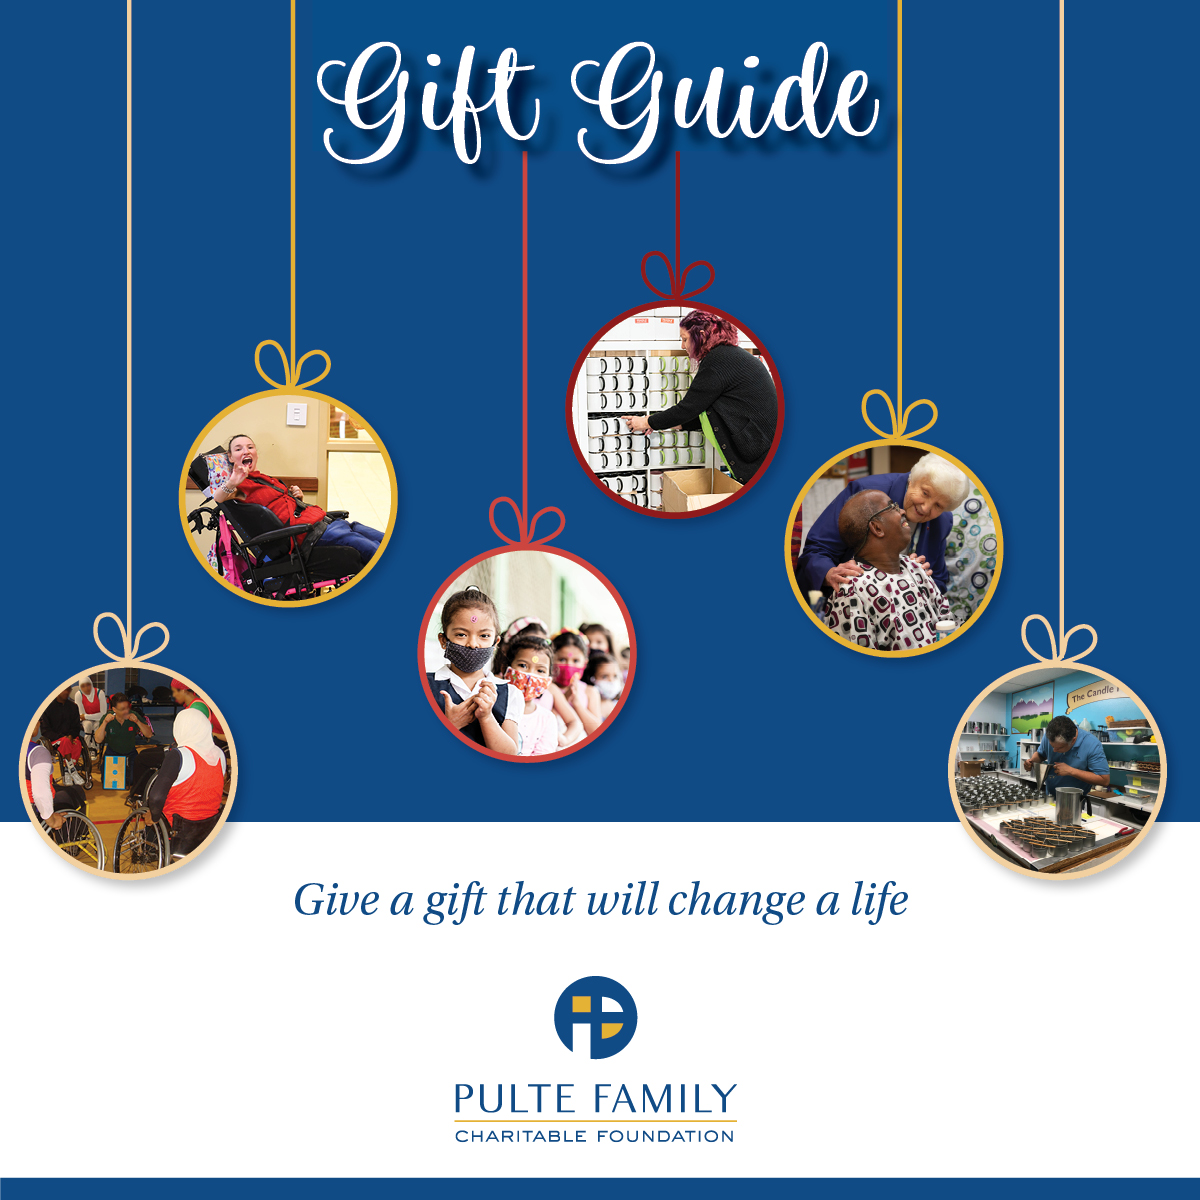 First Annual Pulte Family Foundation Gift Guide